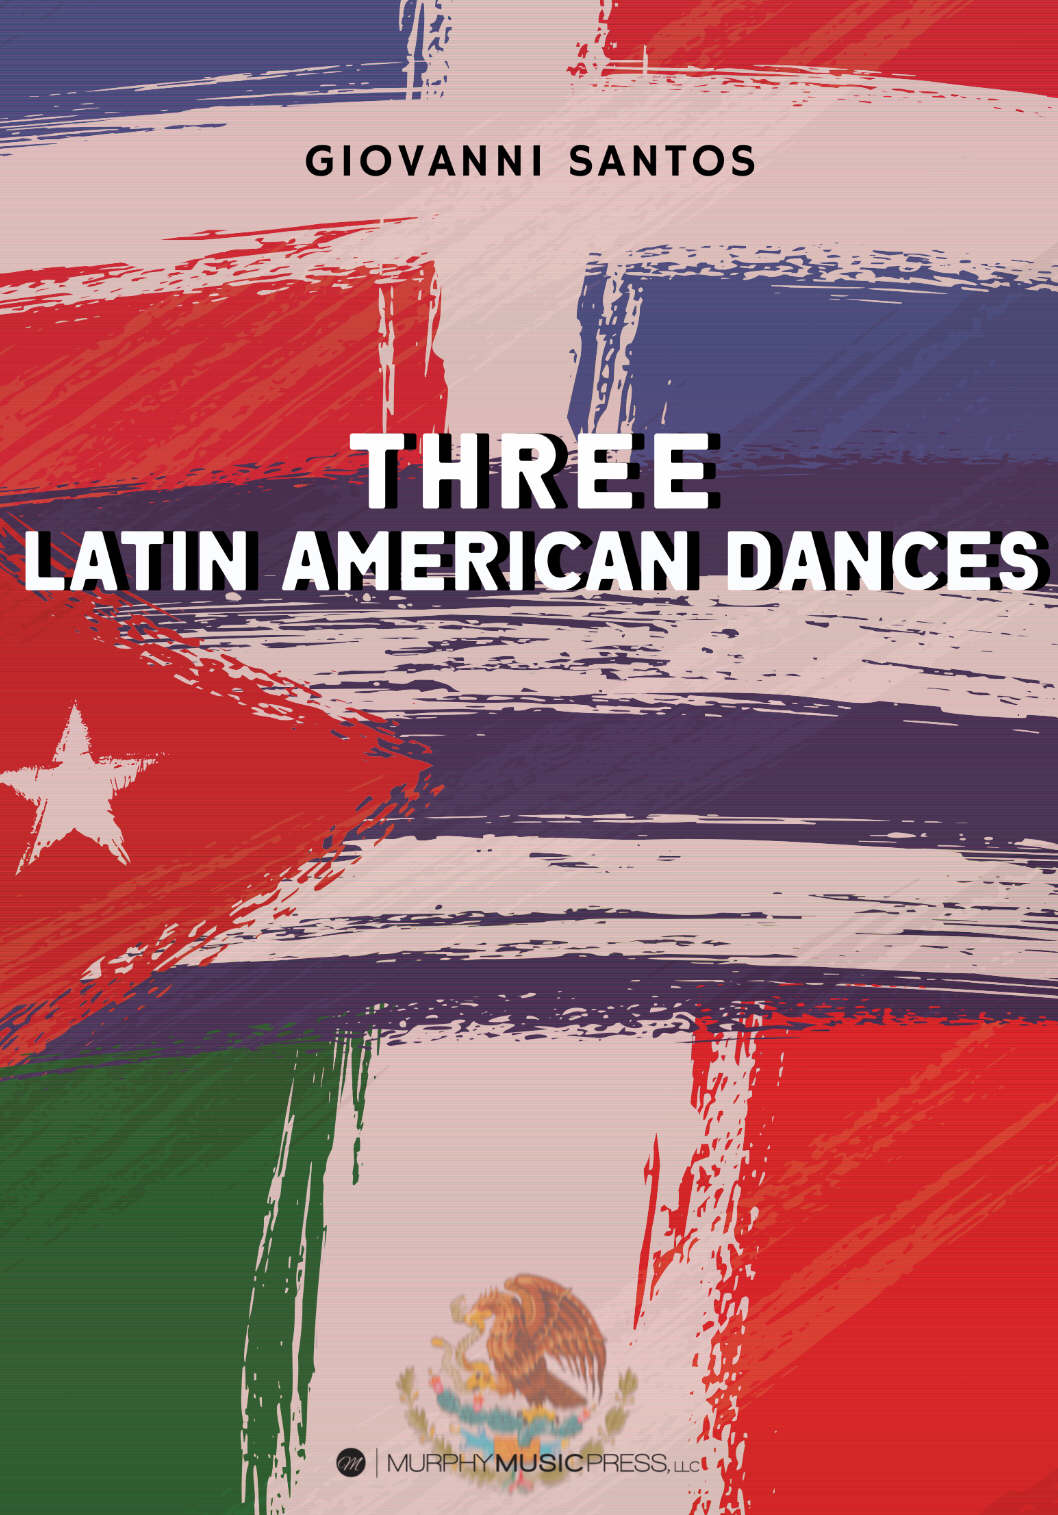 Three Latin American Dances (Score Only) by Giovanni Santos